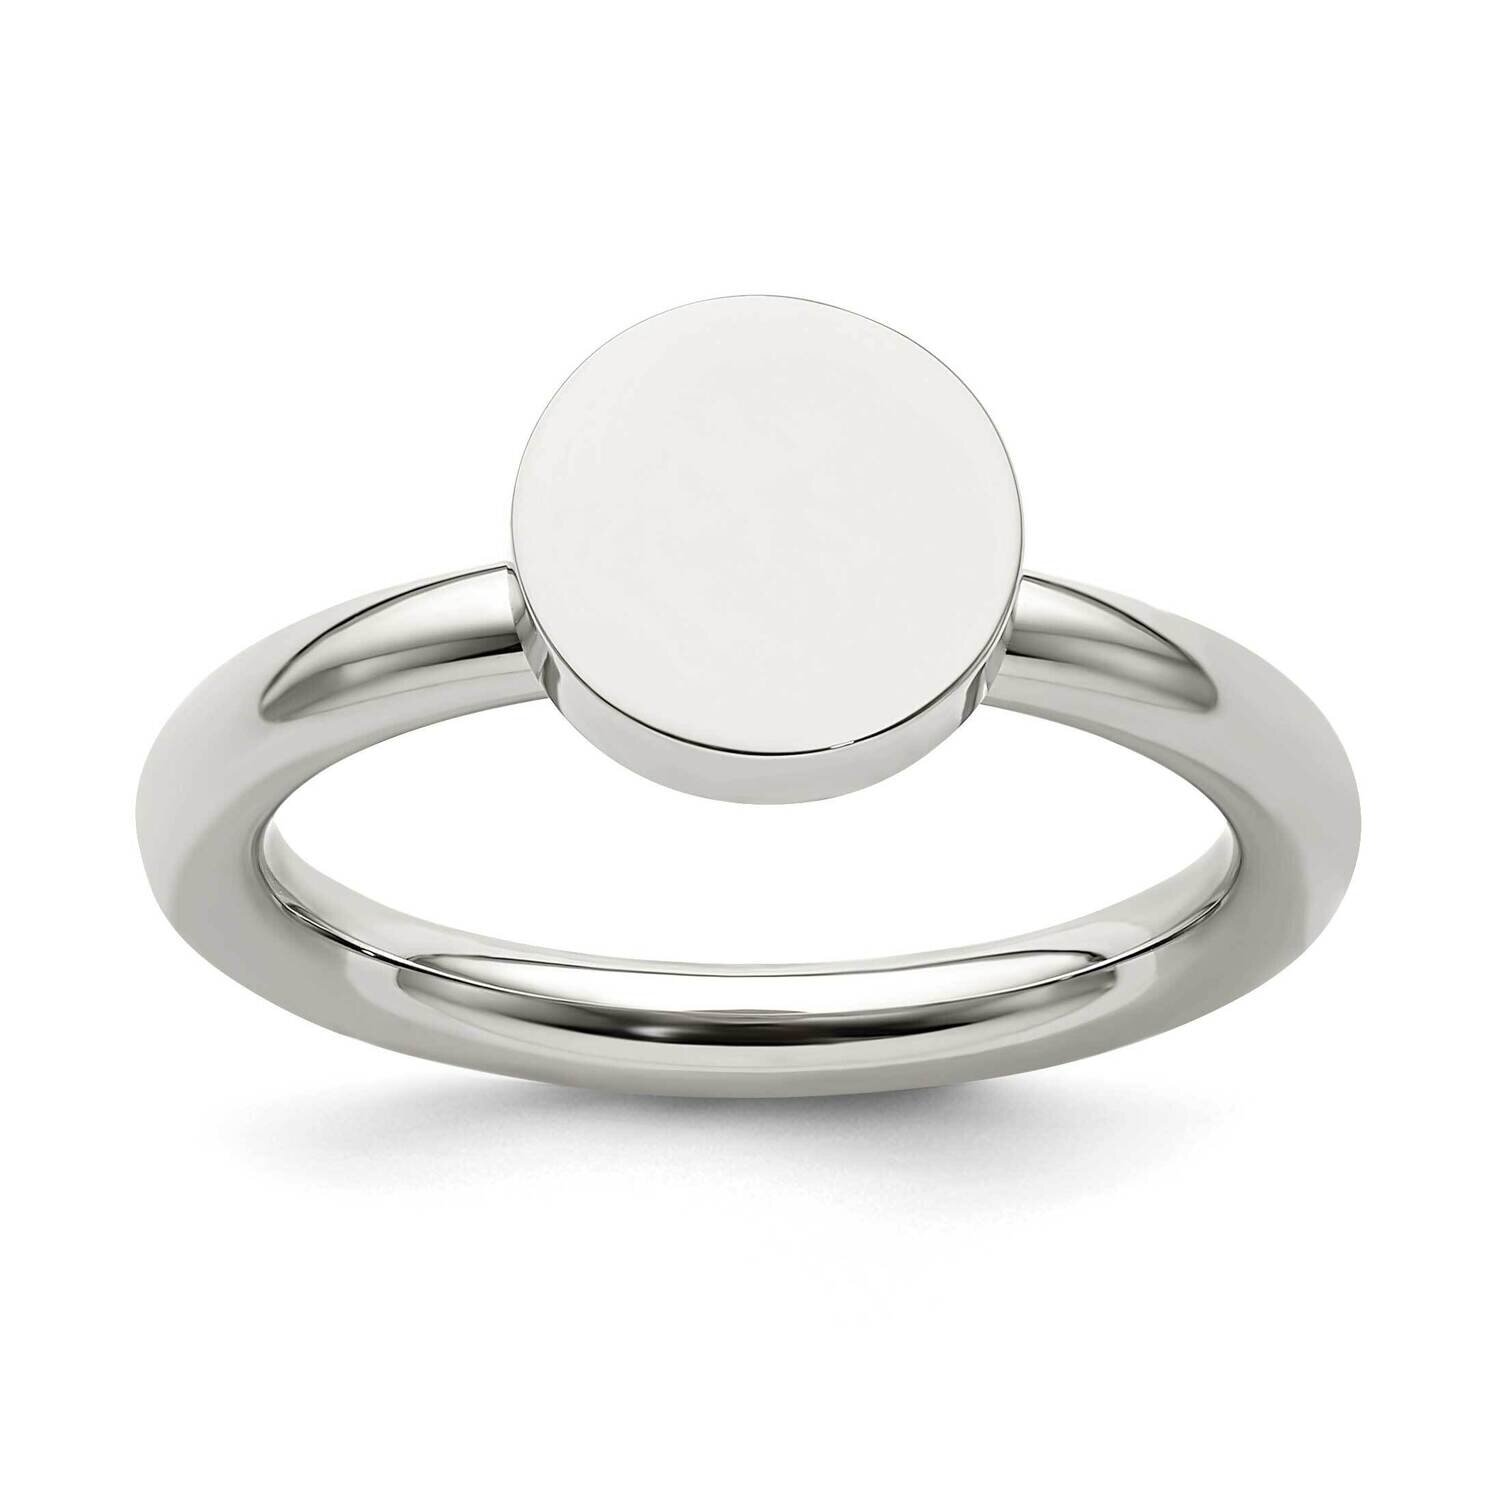 Circle Ring Stainless Steel Polished SR670-6